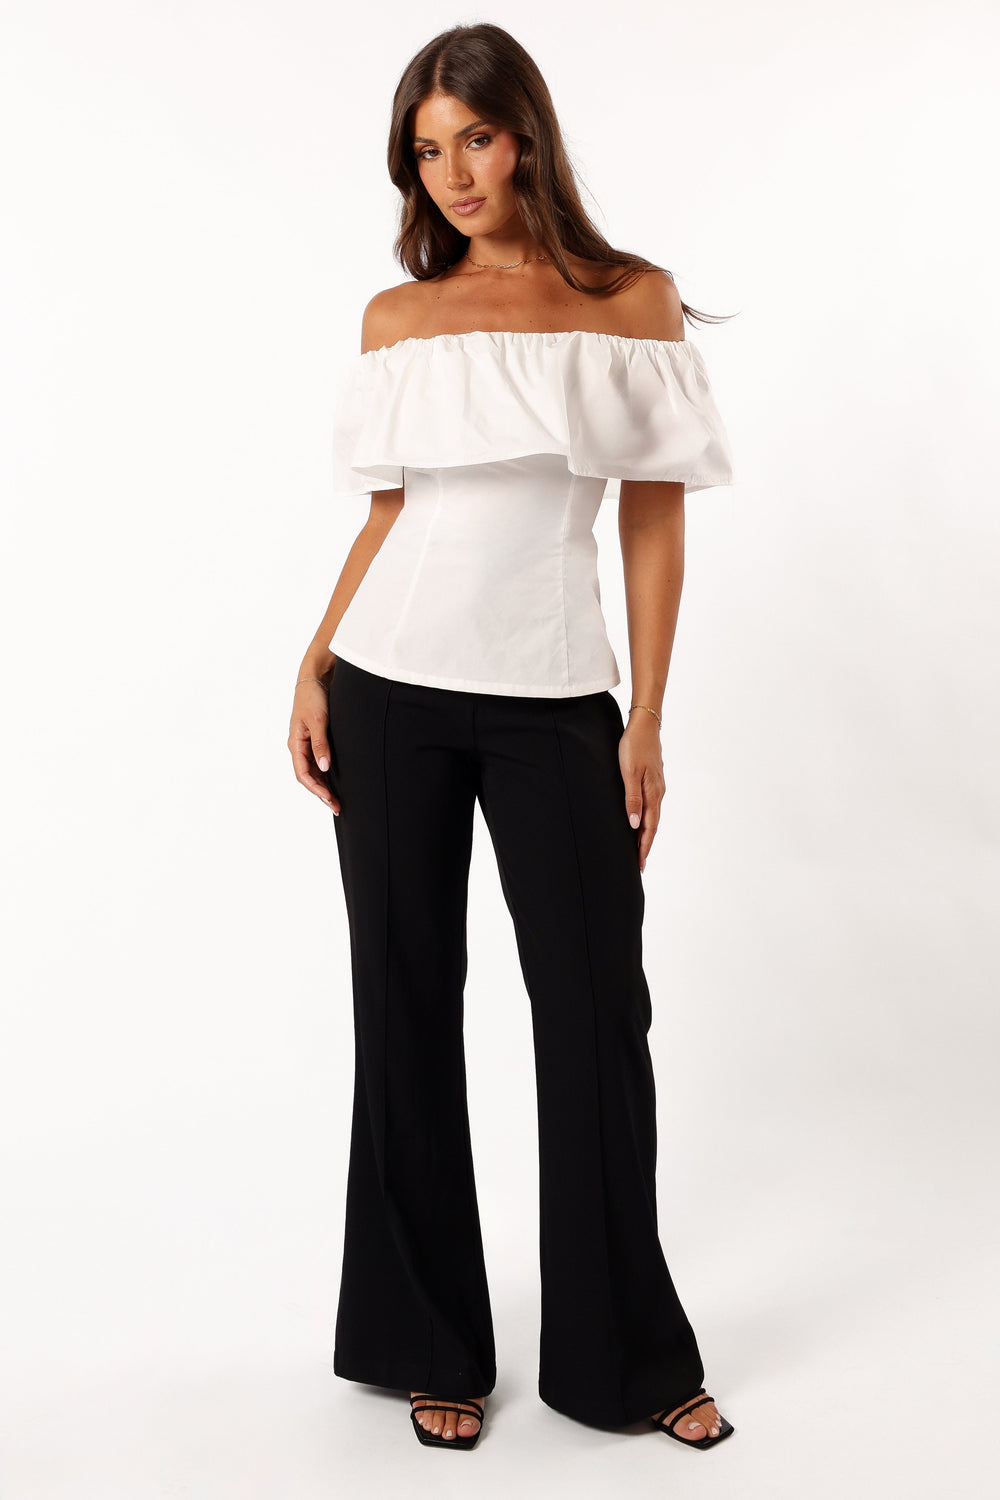 Petal and Pup USA TOPS Emery Off The Shoulder Top - White